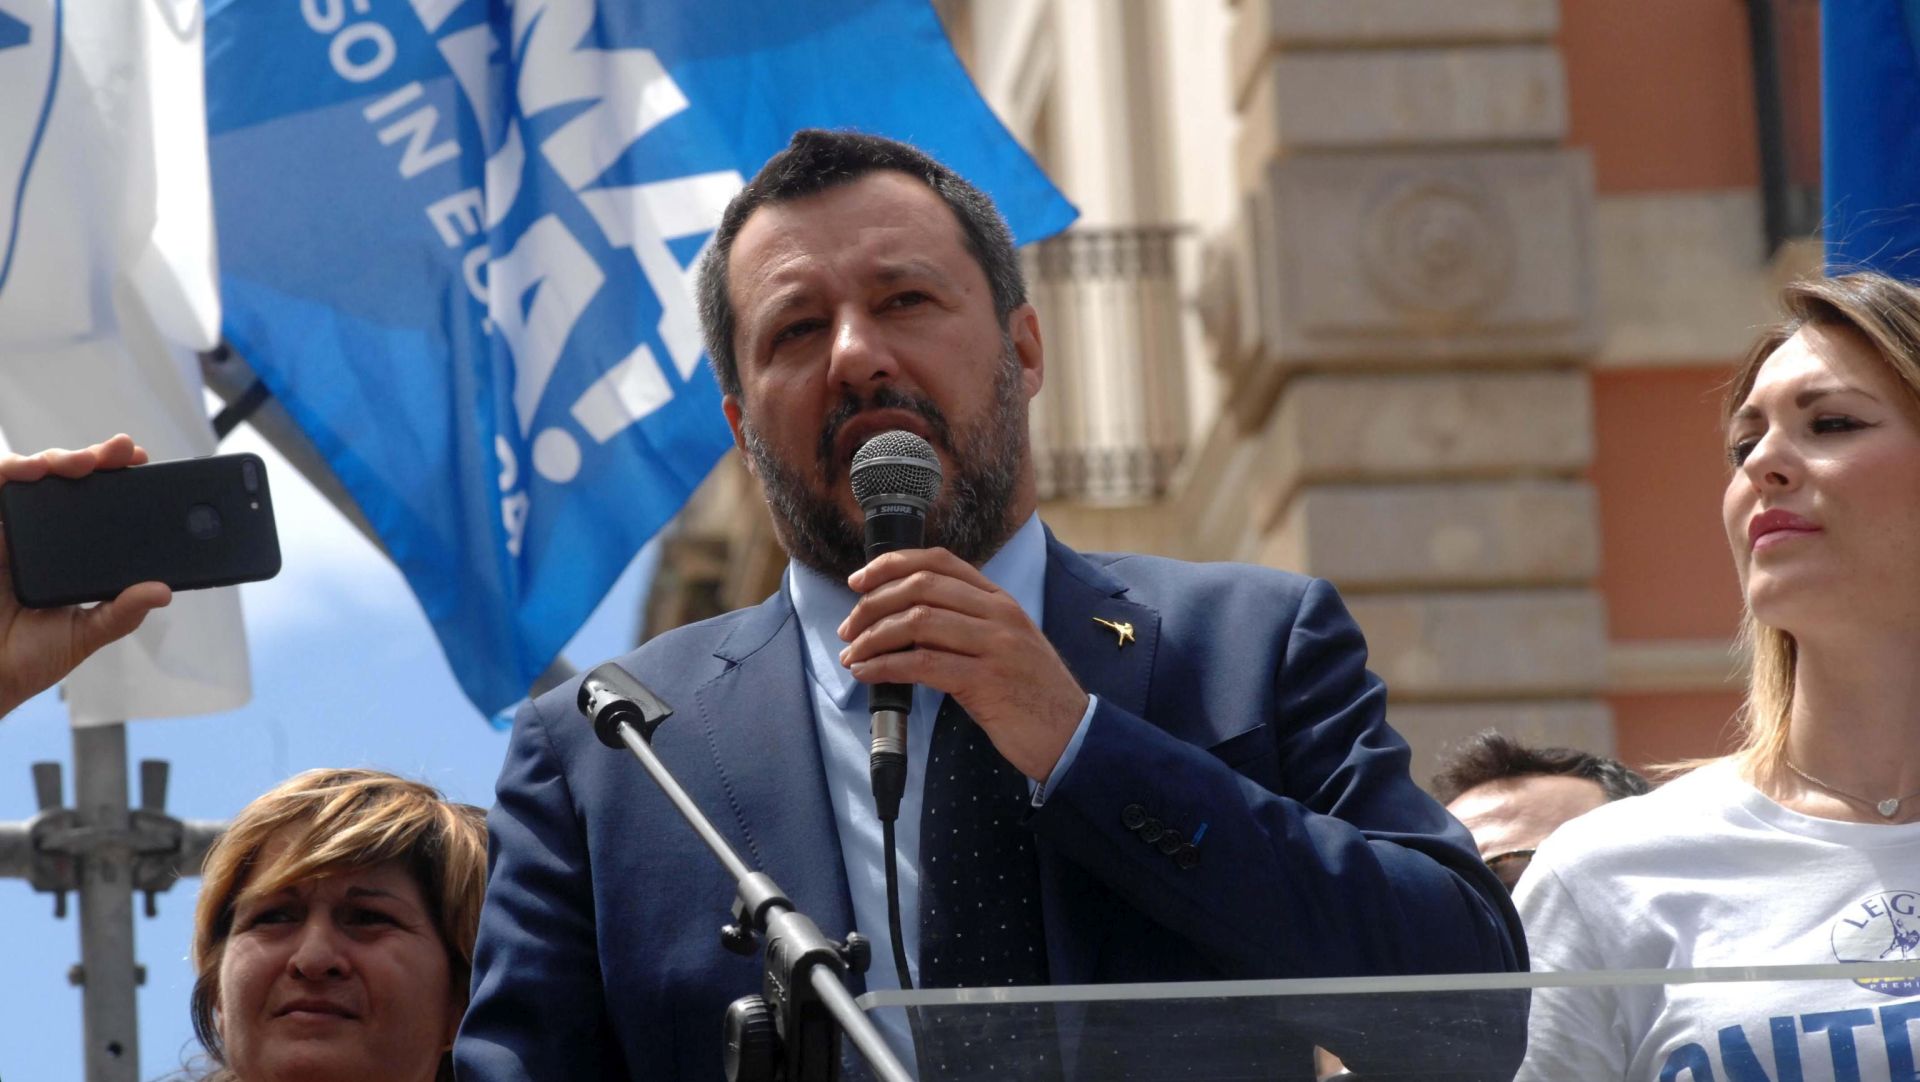 epa07589300 Italian Deputy Premier and Interior Minister, Matteo Salvini, attends an election campaign rally in Lecce, southern Italy, 21 May 2019. Matteo Salvini is campaigning for his right-wing Lega (League) party in the upcoming European election.  EPA/CLAUDIO LONGO